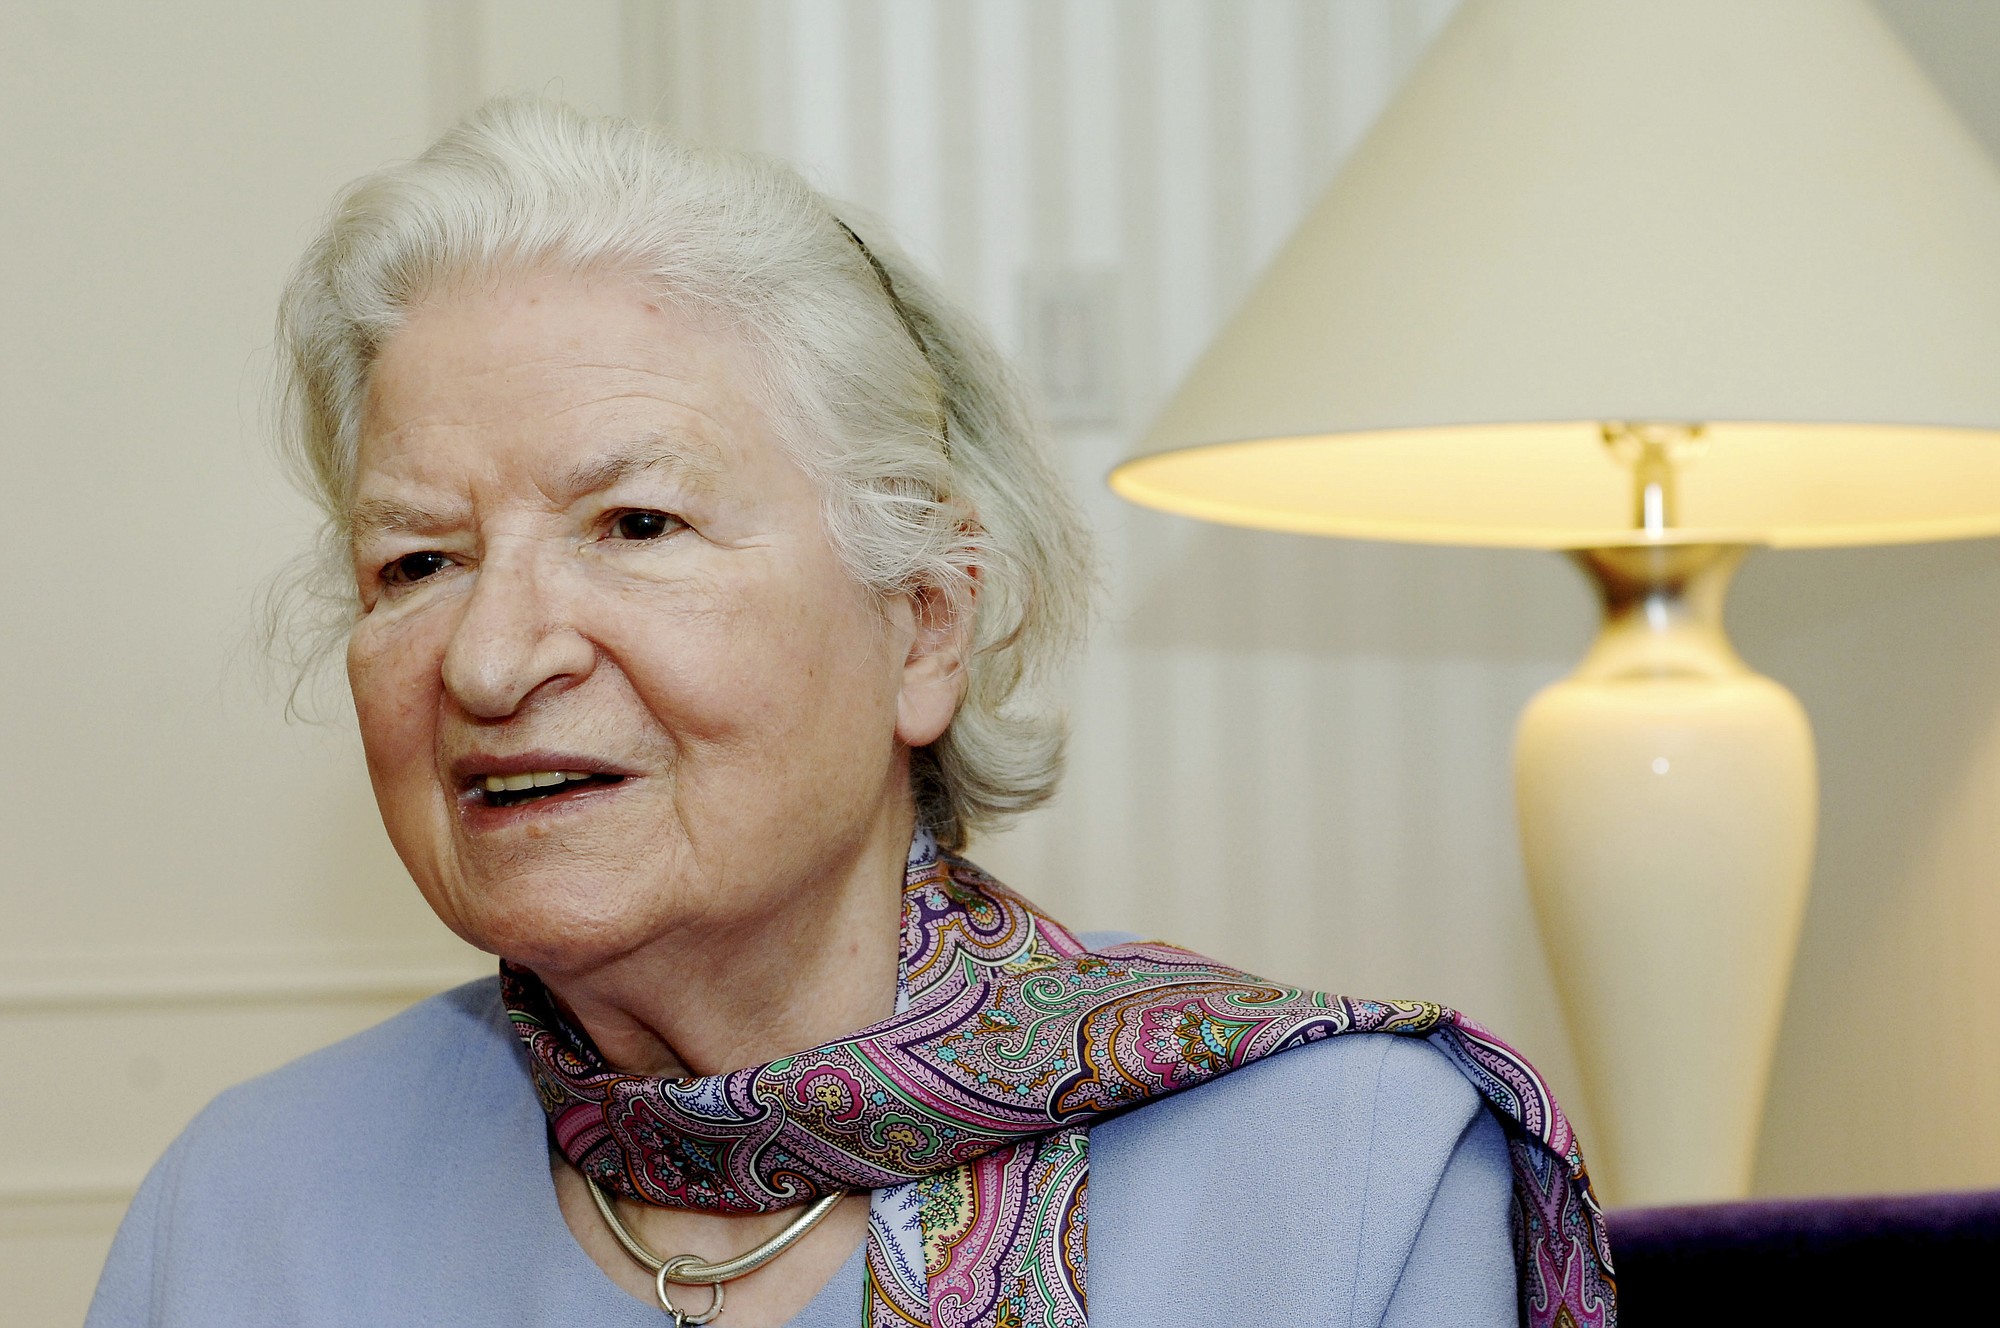 Associated Press files
Author P.D. James, who brought realistic modern characters to the classical British detective story, died Thursday. She was 94.